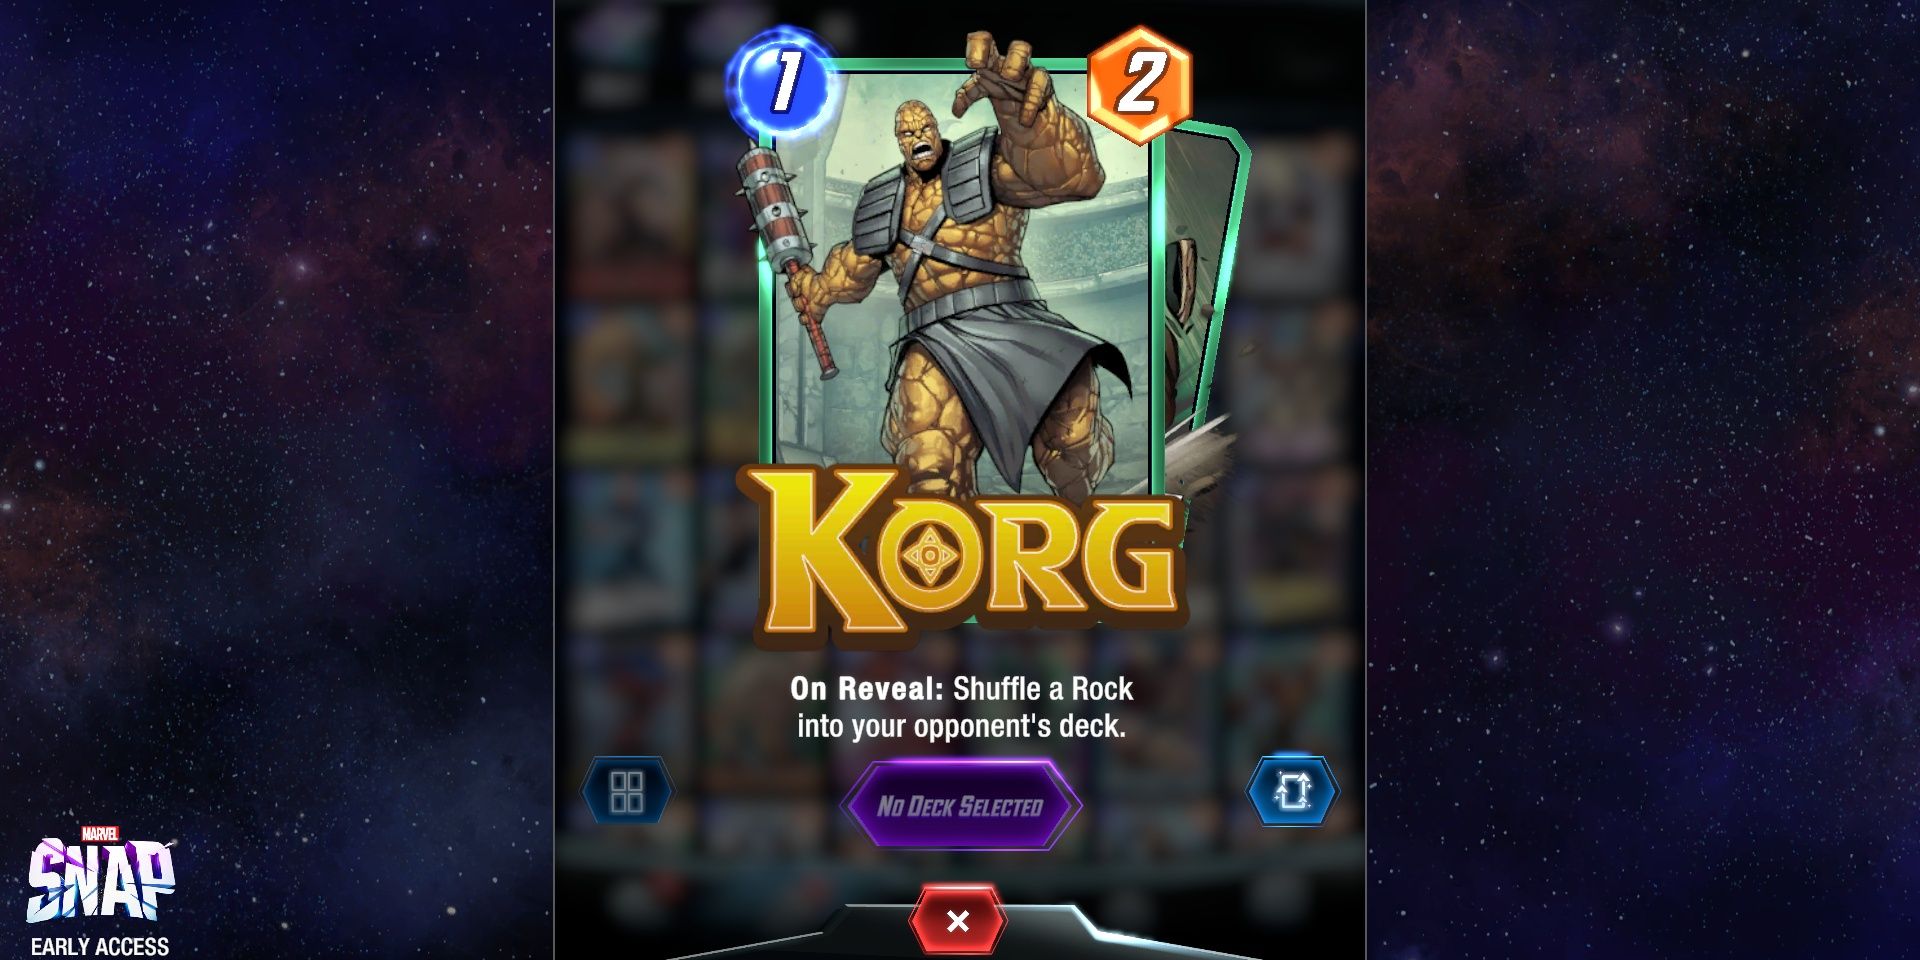 Korg's card in Marvel Snap in front of a starry sky.